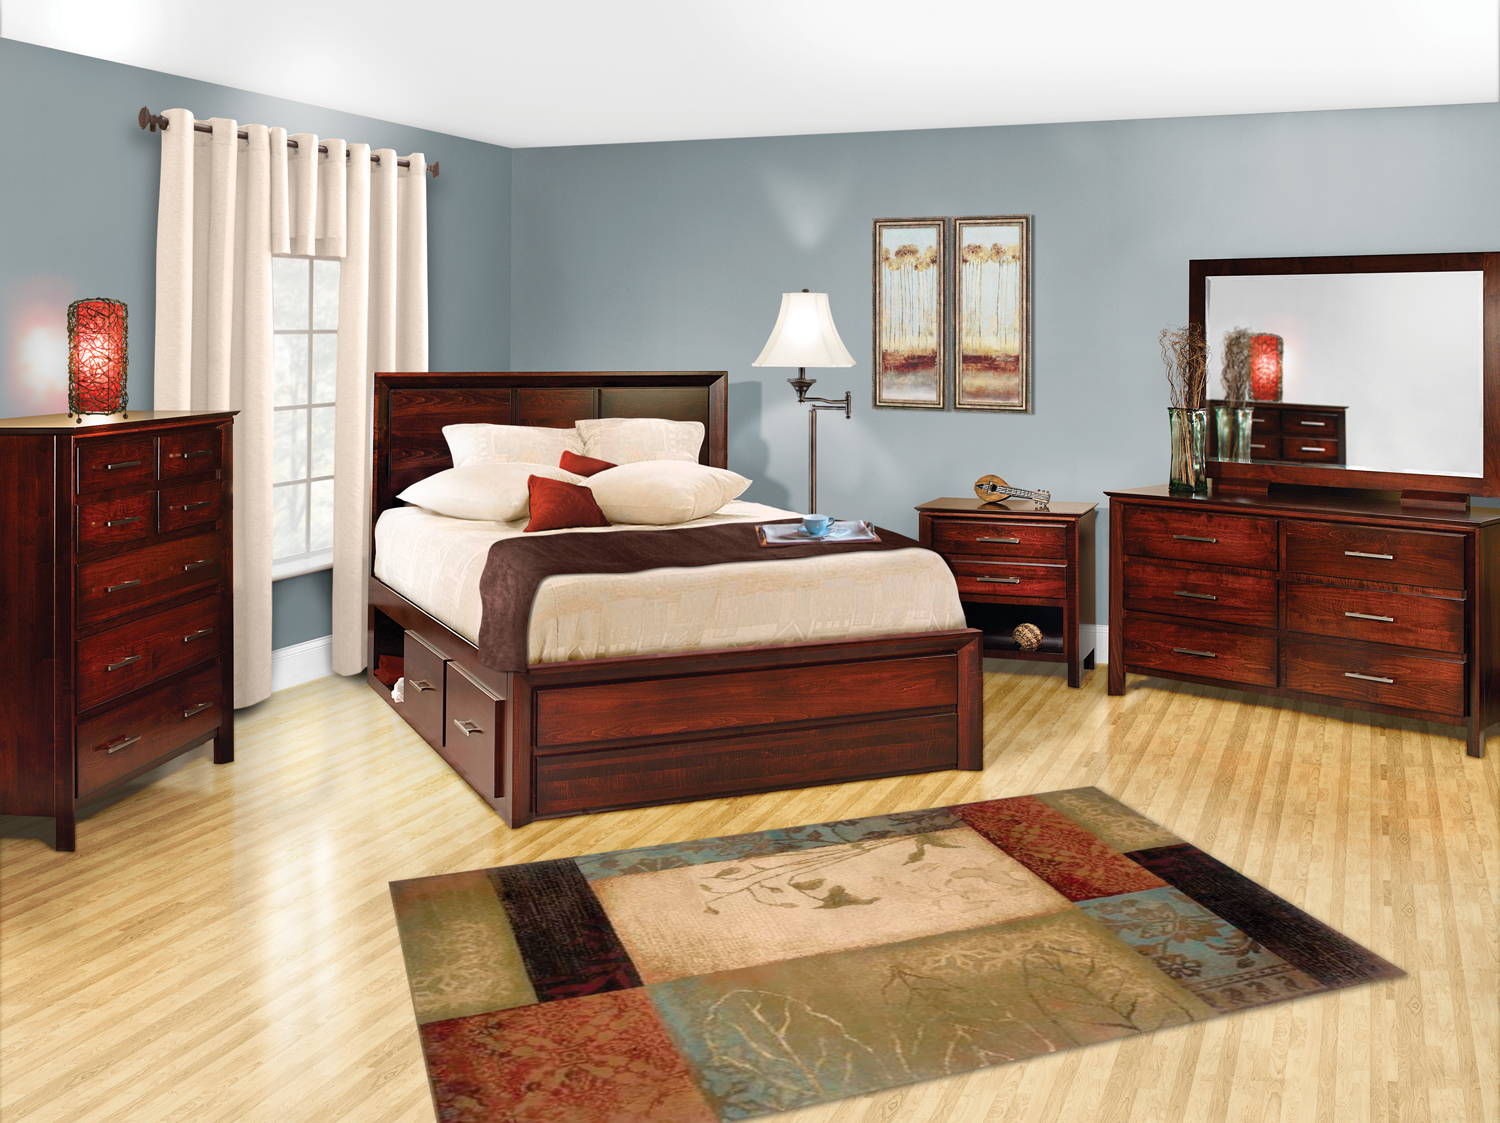 Image of fully customizable Zenith Bedroom Set through Harvest Home Interiors Amish Solid Wood Furniture